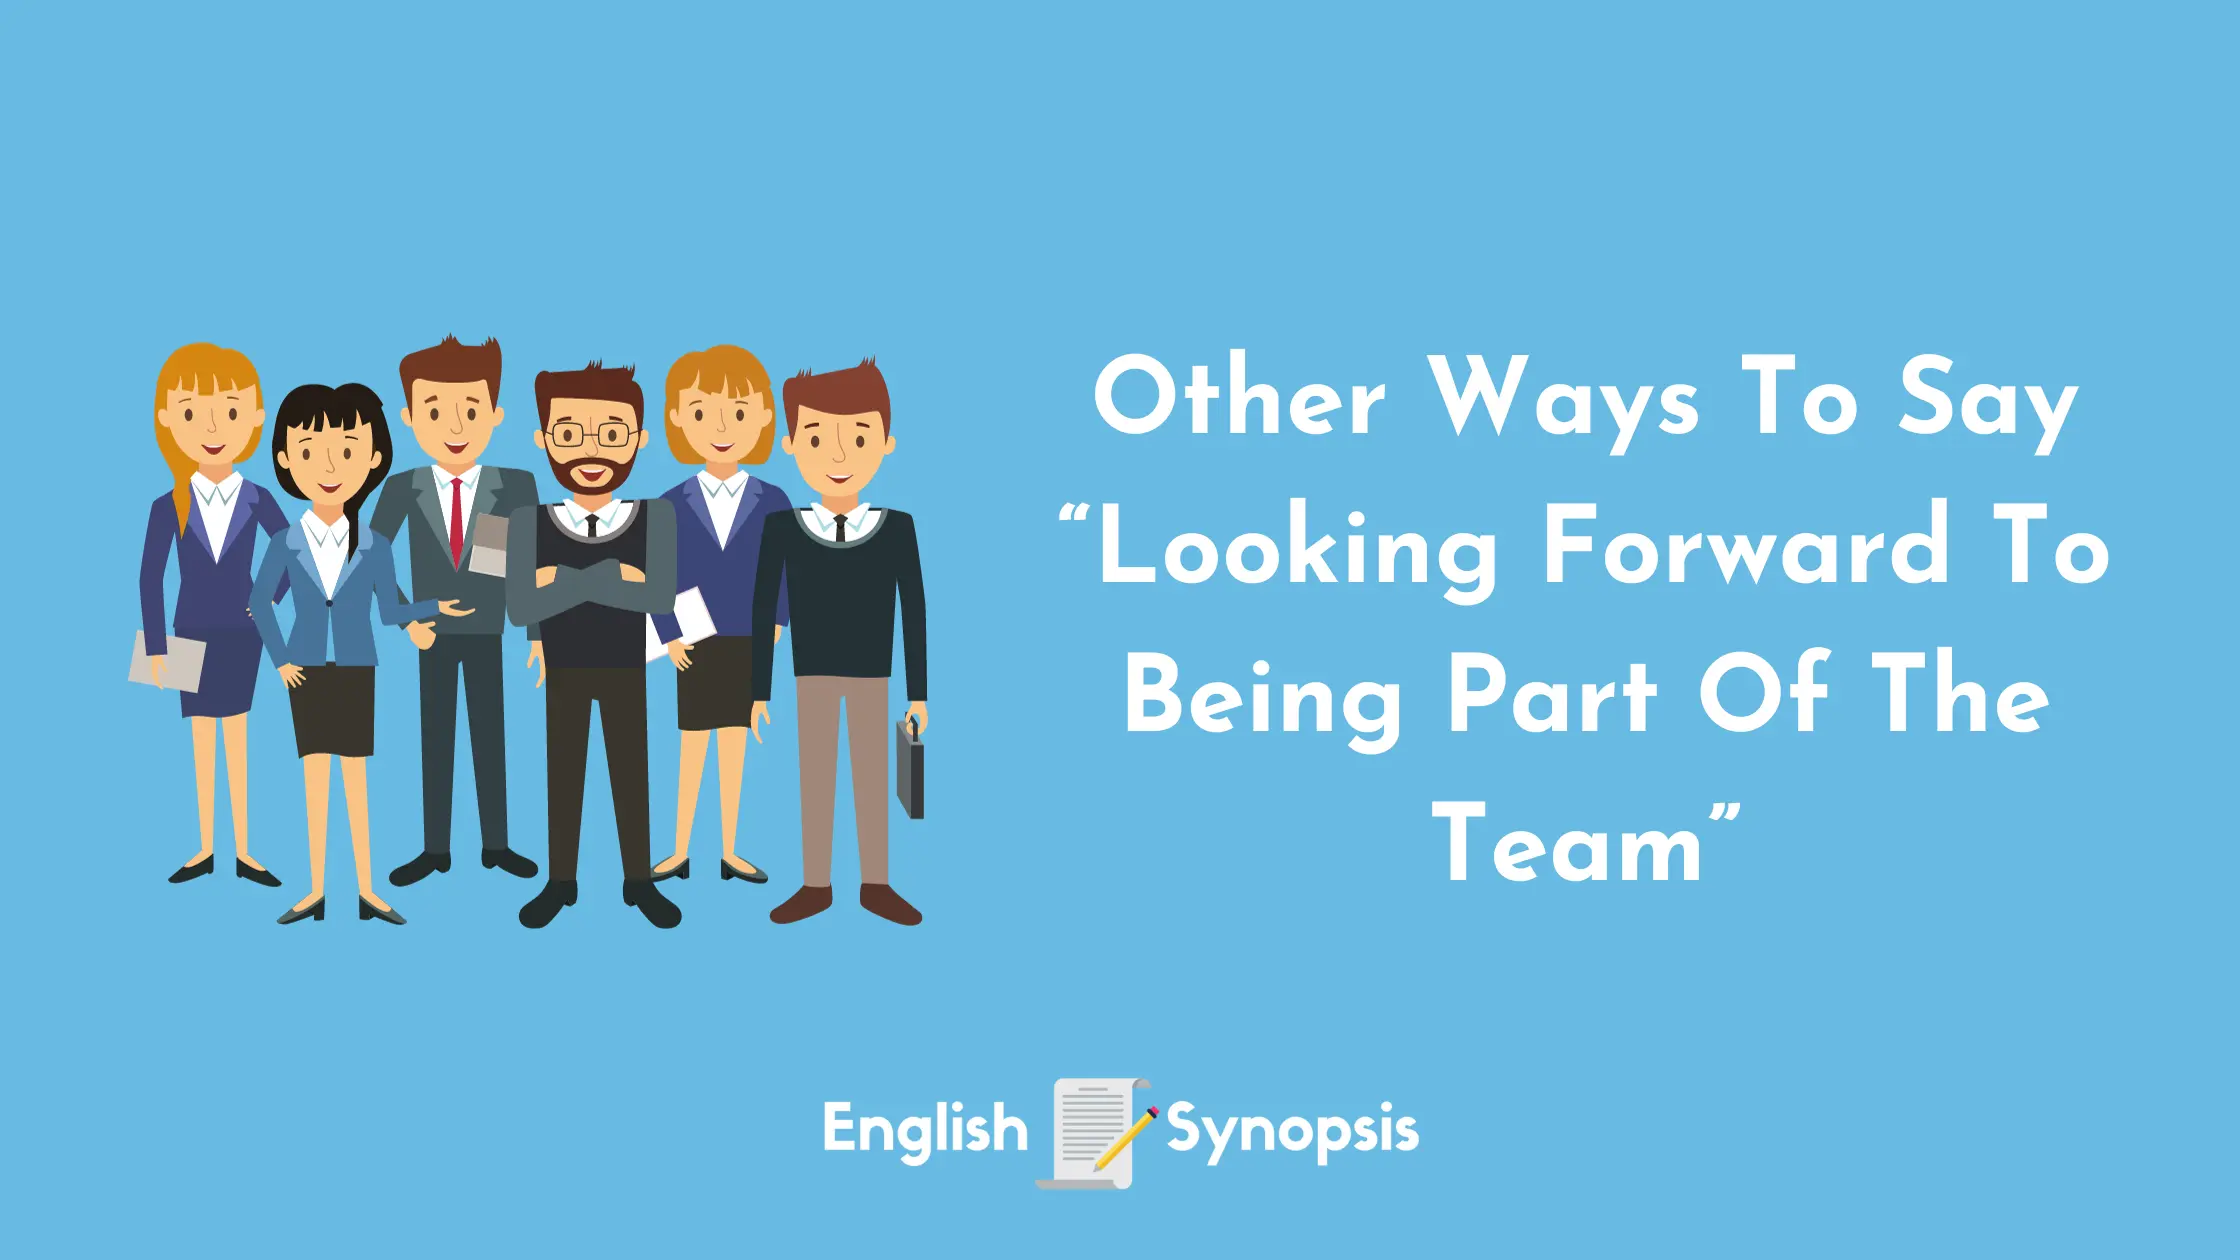 Other Ways To Say "Looking Forward To Being Part Of The Team"